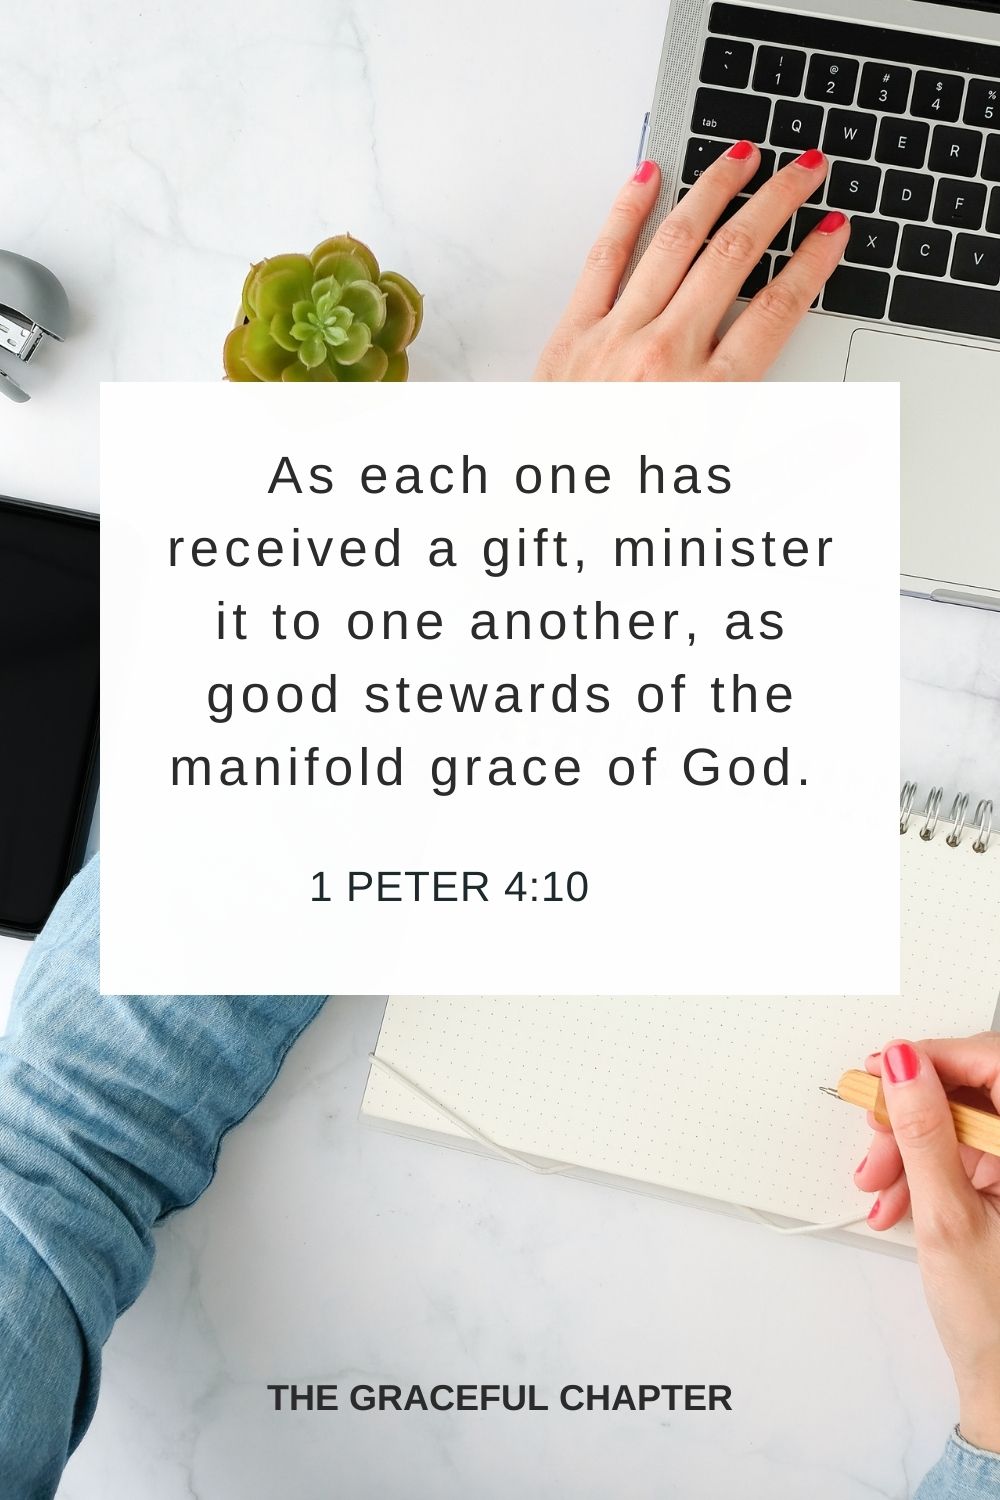 As each one has received a gift, minister it to one another, as good stewards of the manifold grace of God. 1 Peter 4:10